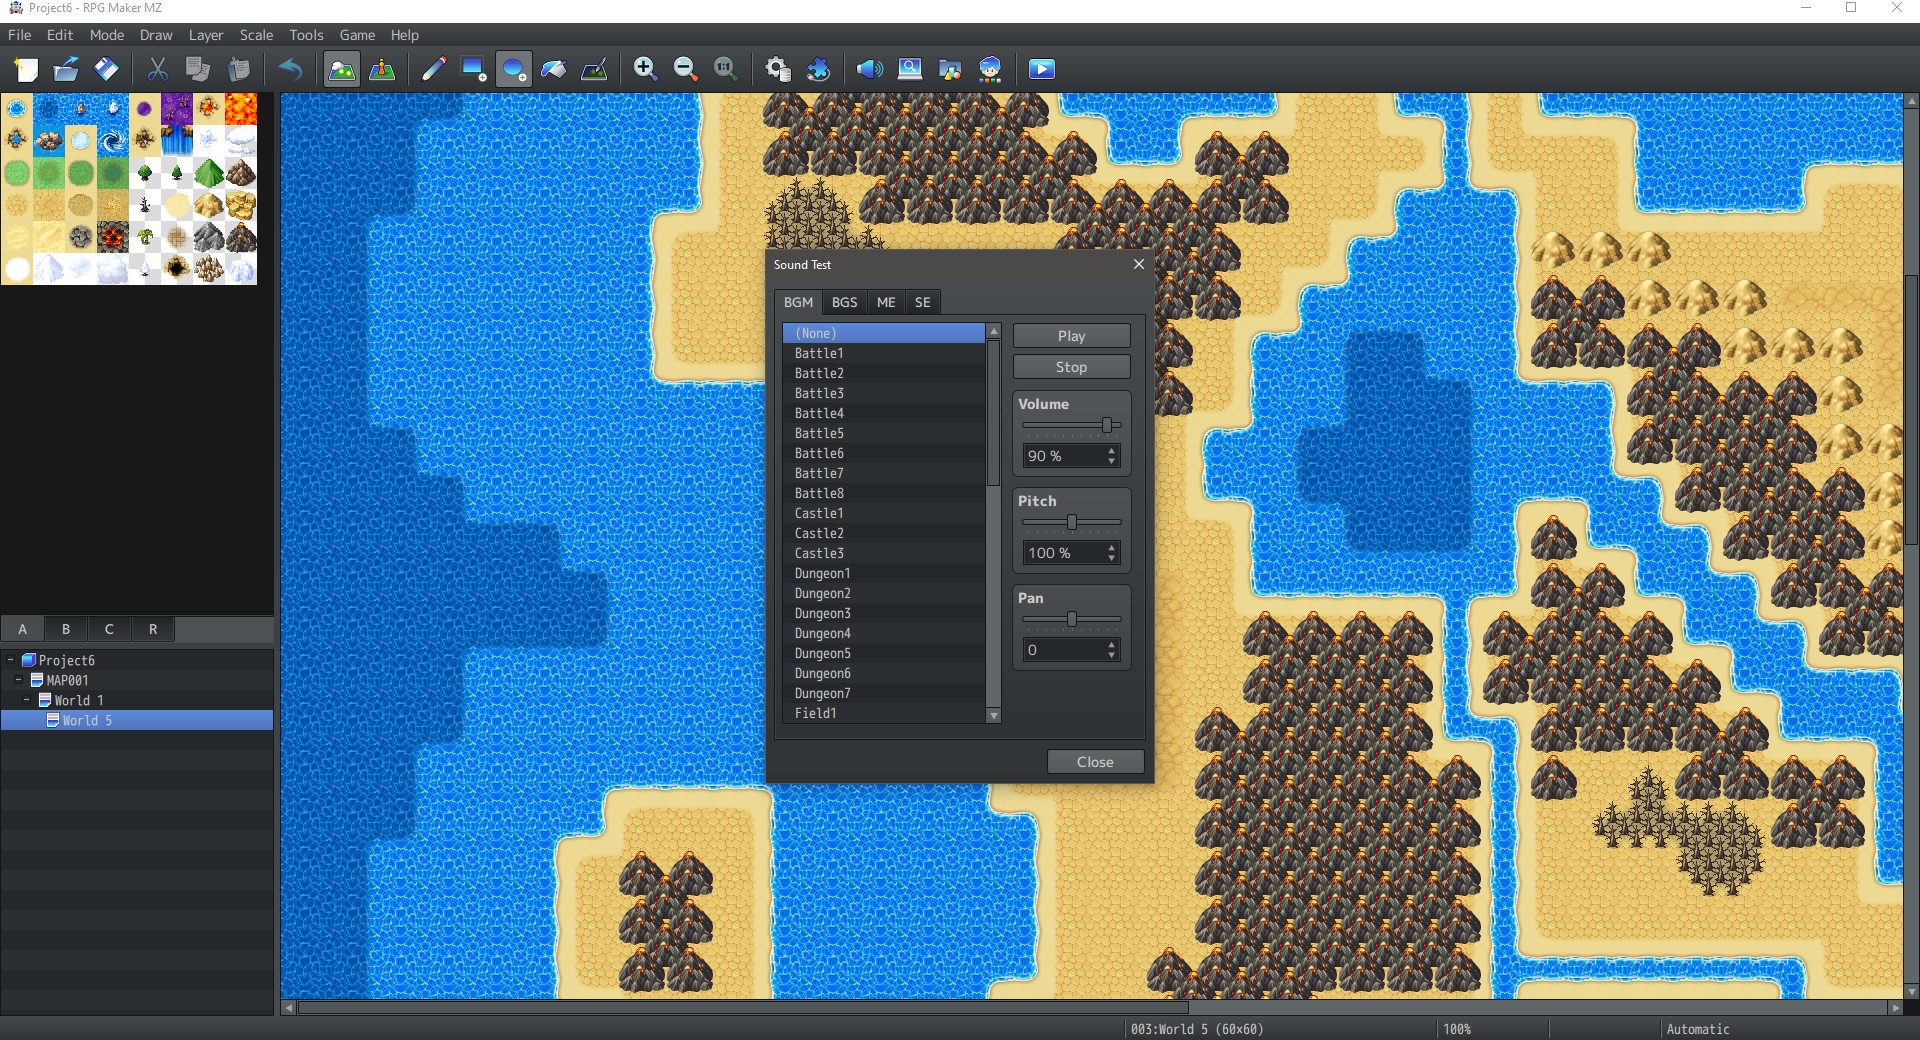 Complete RPG Maker MZ: Create and Publish for PC and Mobile